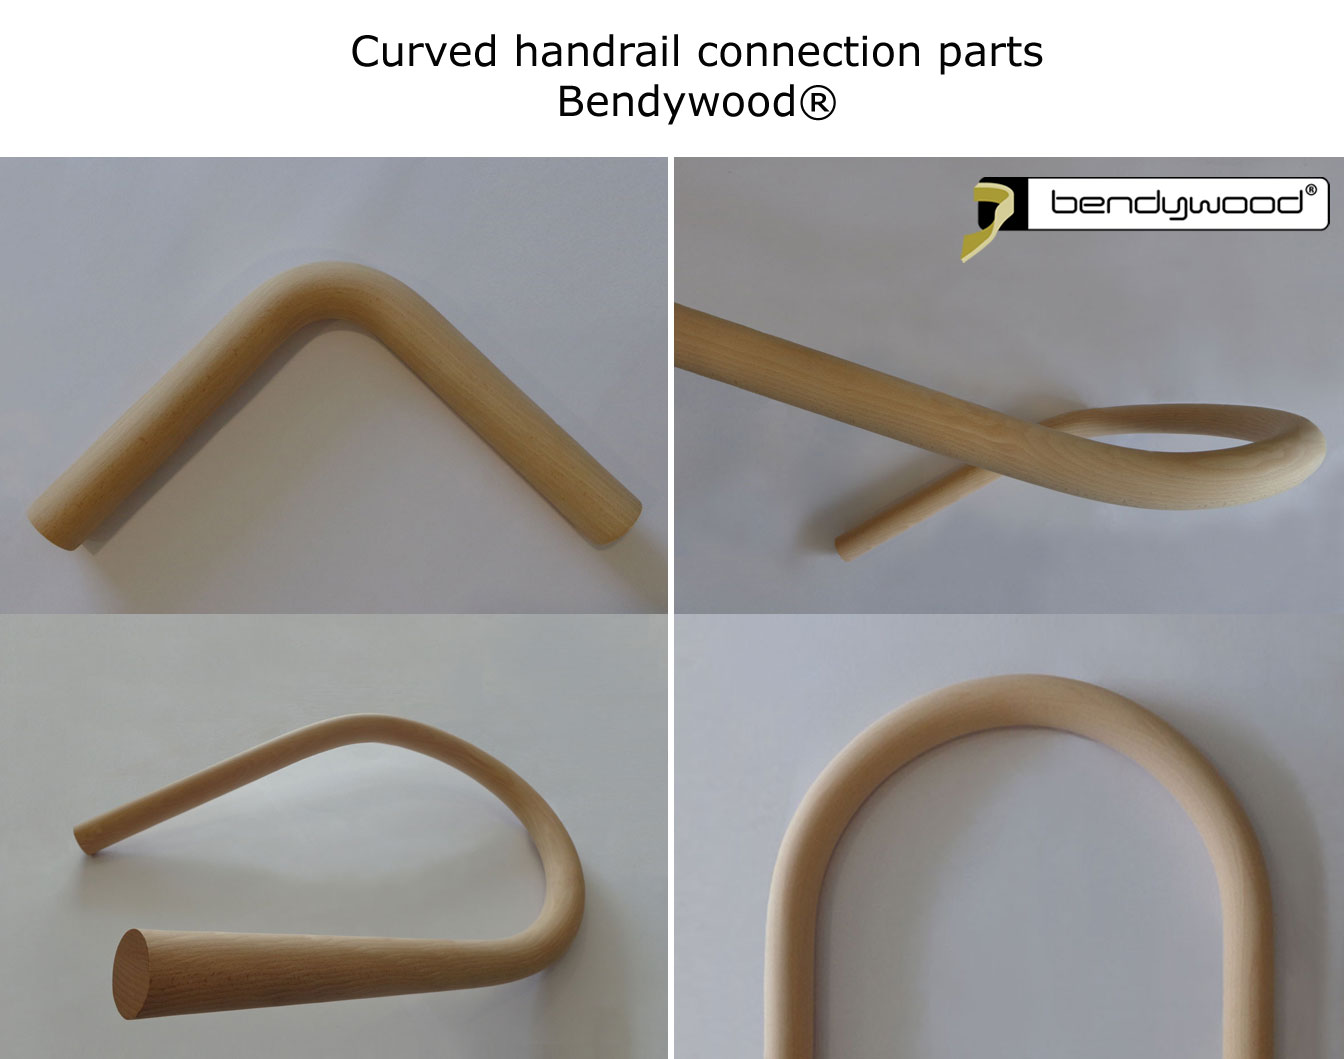 Bending wood Bendywood® - curved wooden handrail connection parts